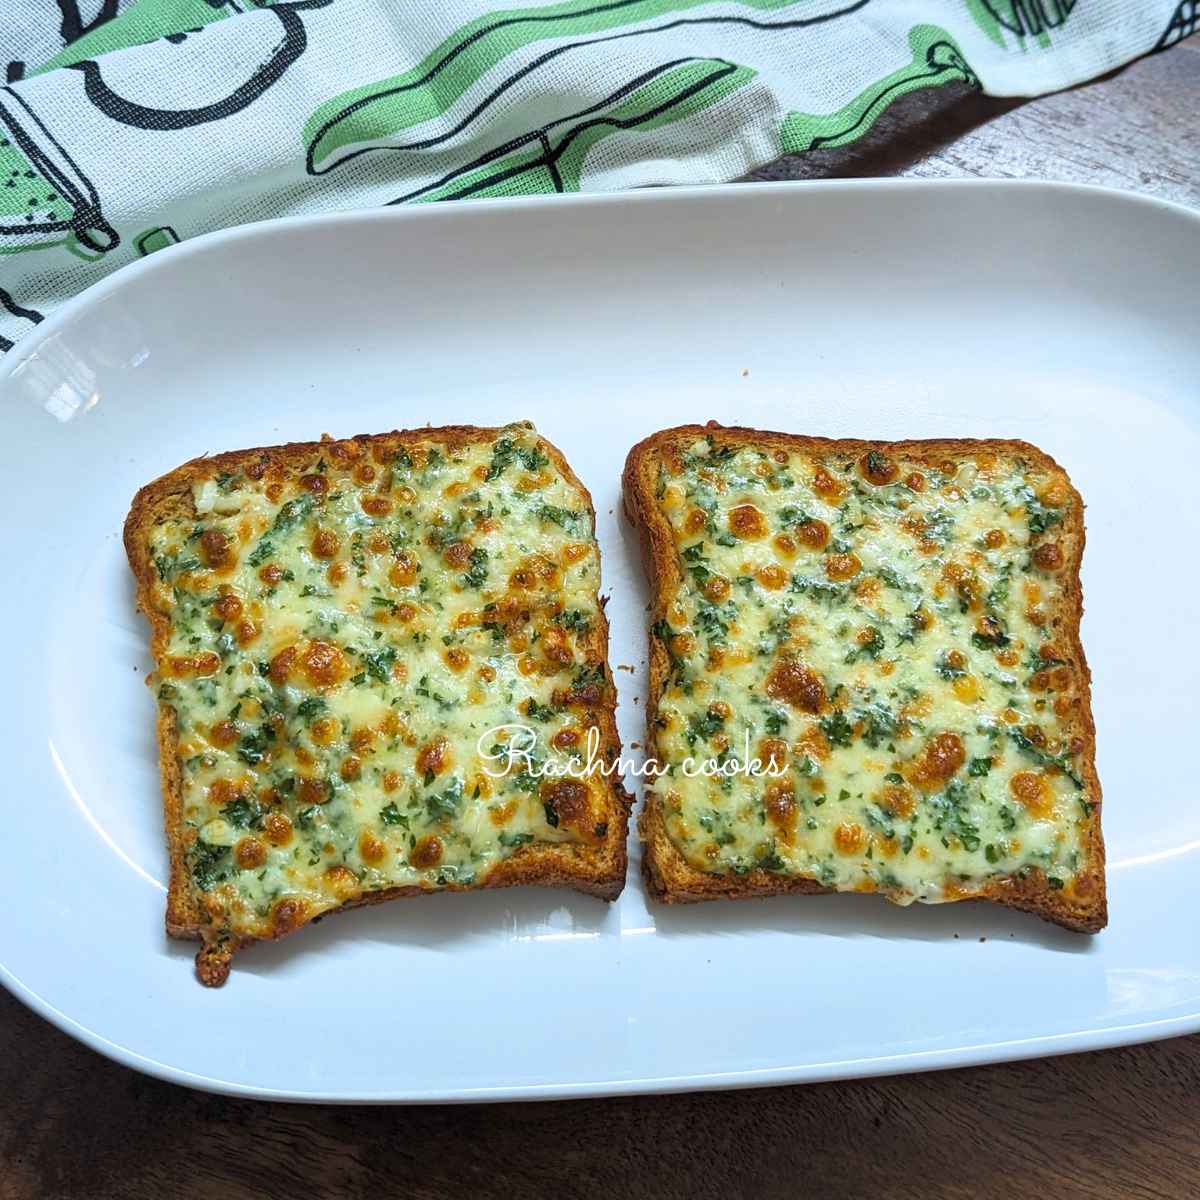 2 slices of browned garlic bread served on plate.